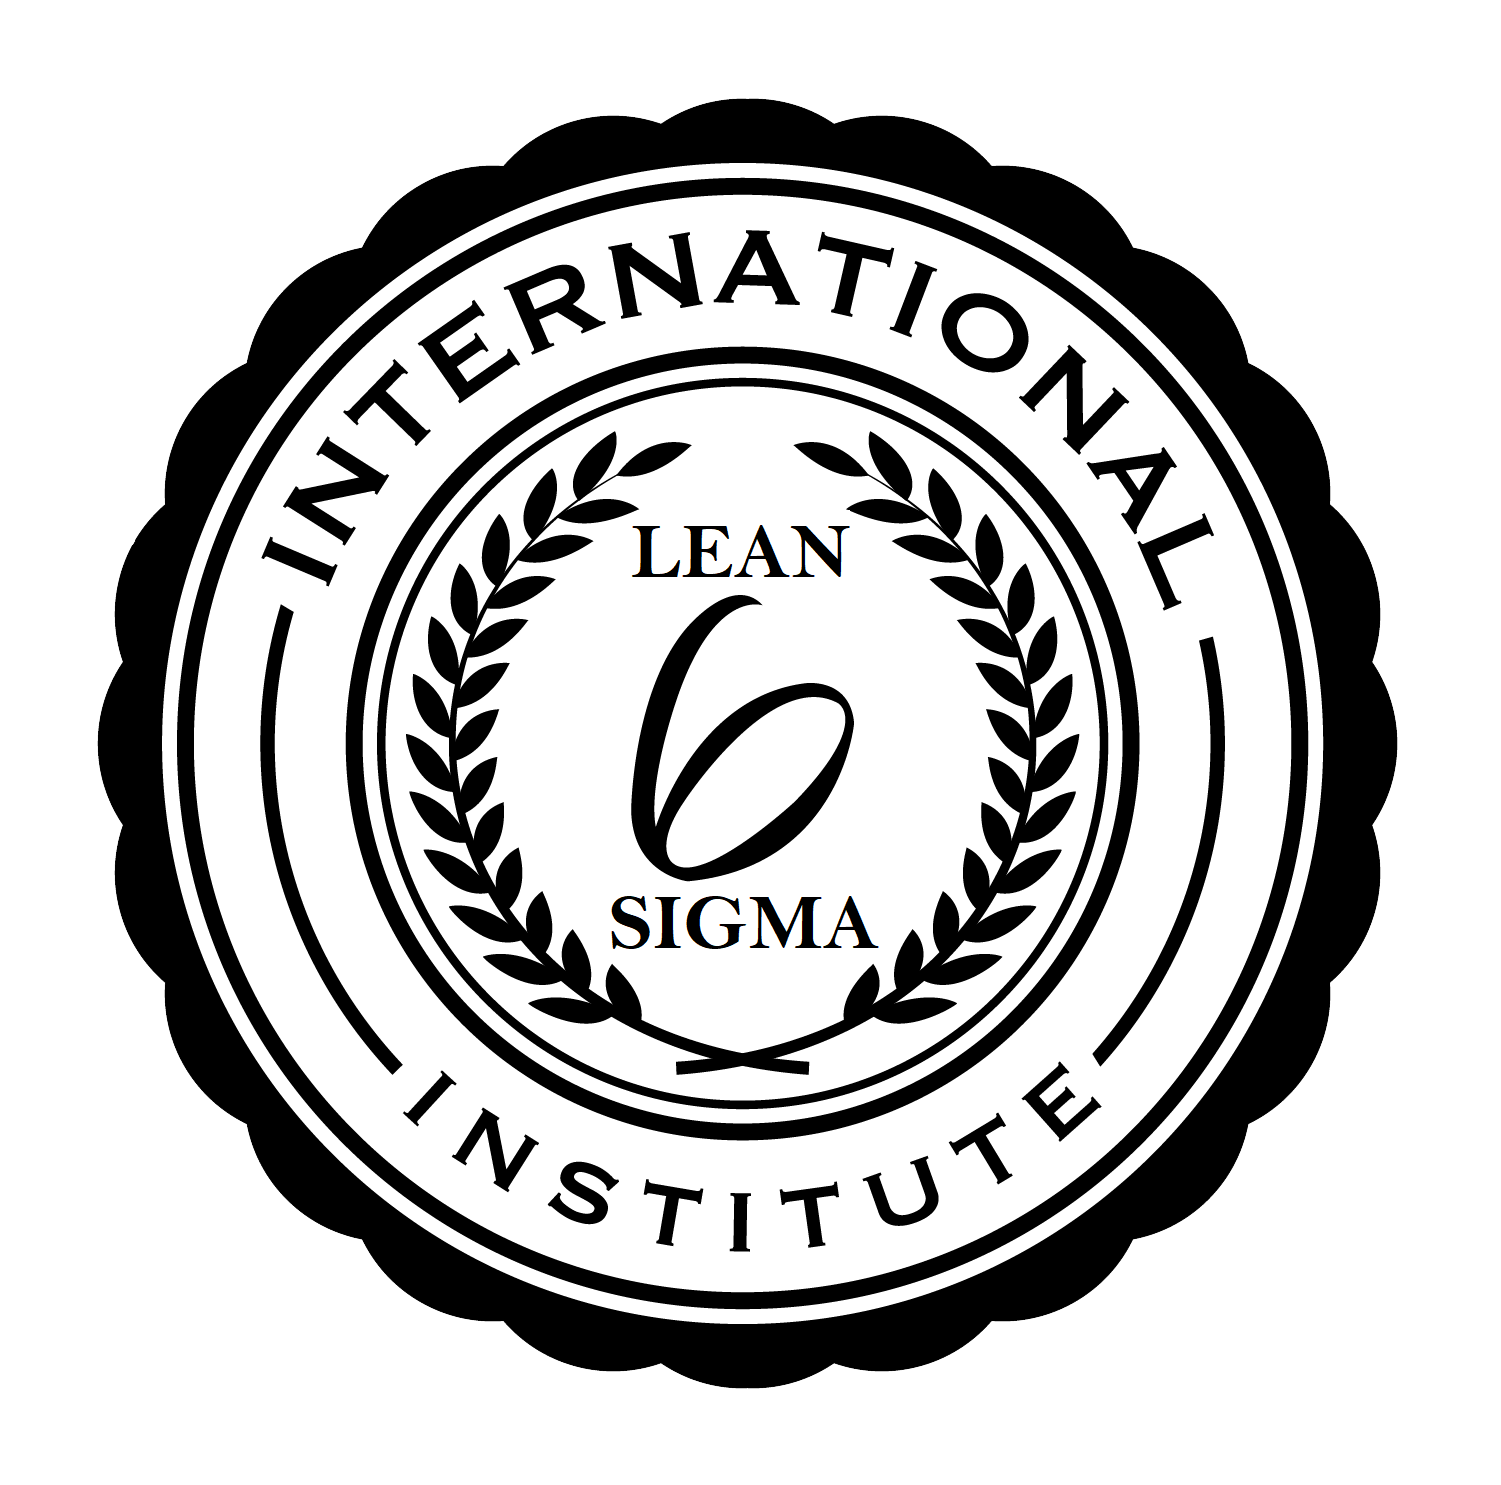 Endorsed by the International Lean Six-Sigma Institute